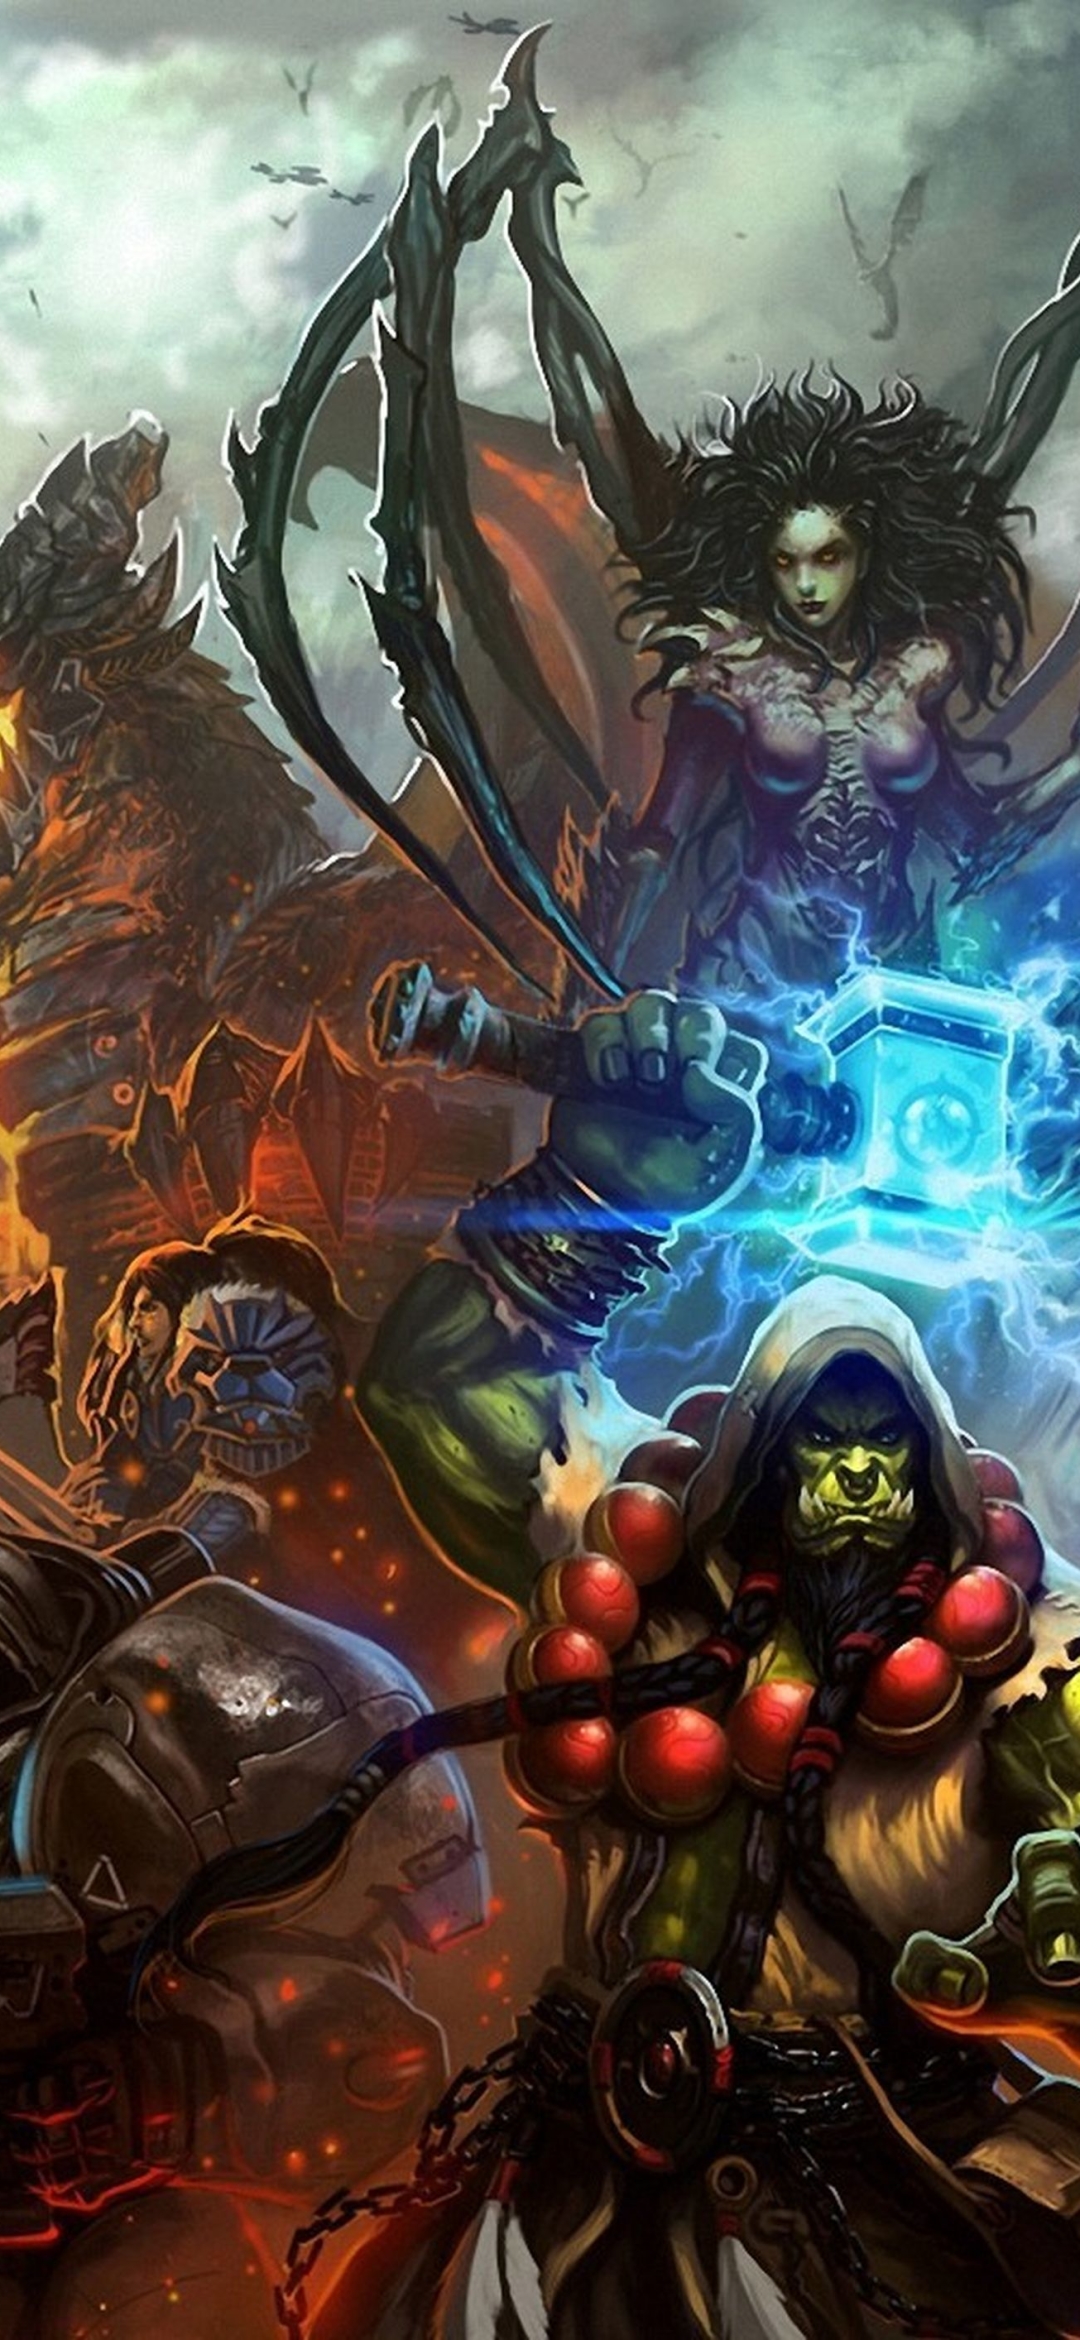 video game, heroes of the storm, sarah kerrigan, jim raynor, deathwing (world of warcraft), thrall (world of warcraft)